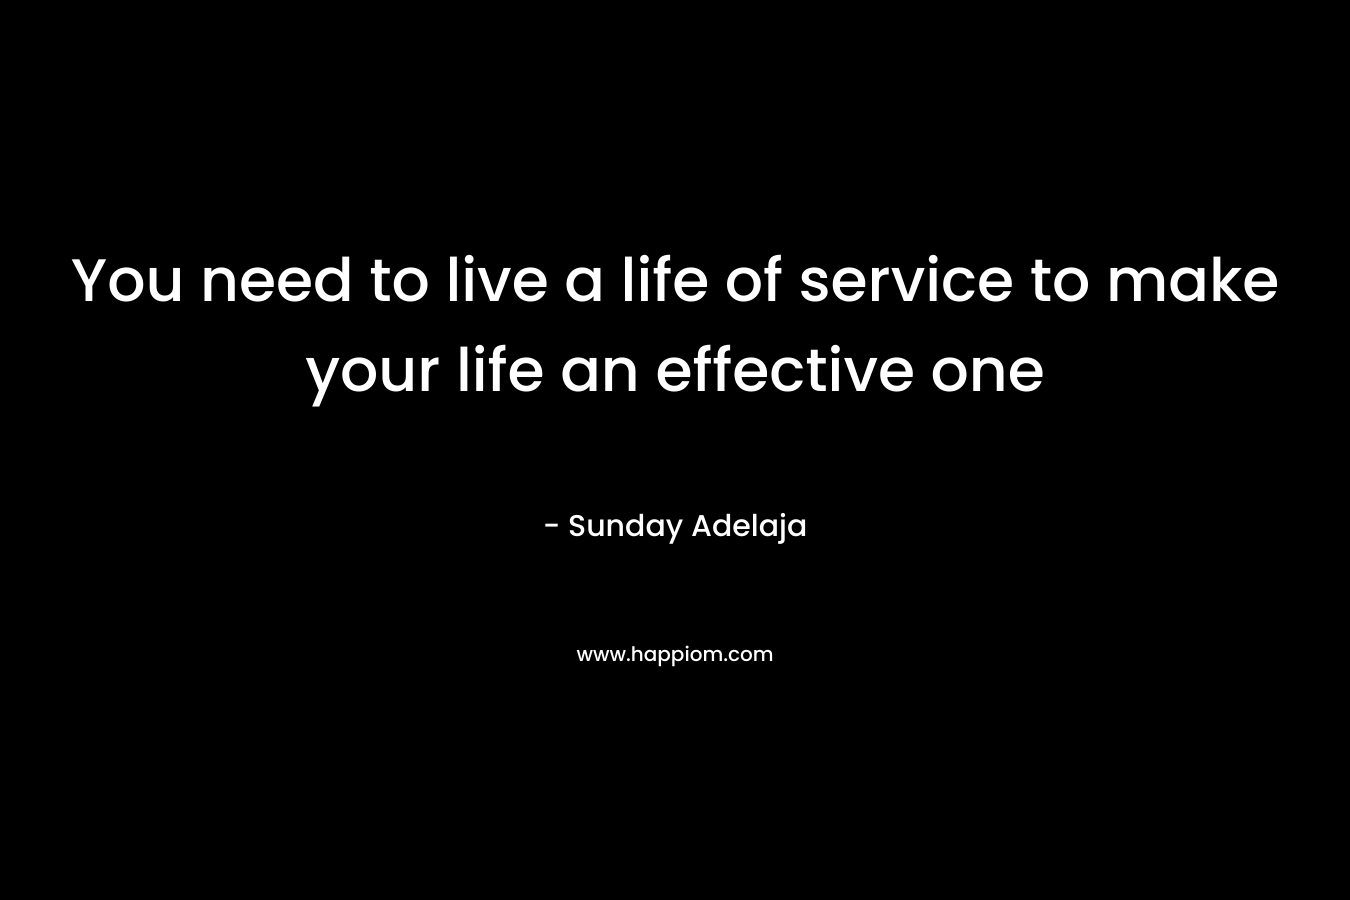 You need to live a life of service to make your life an effective one